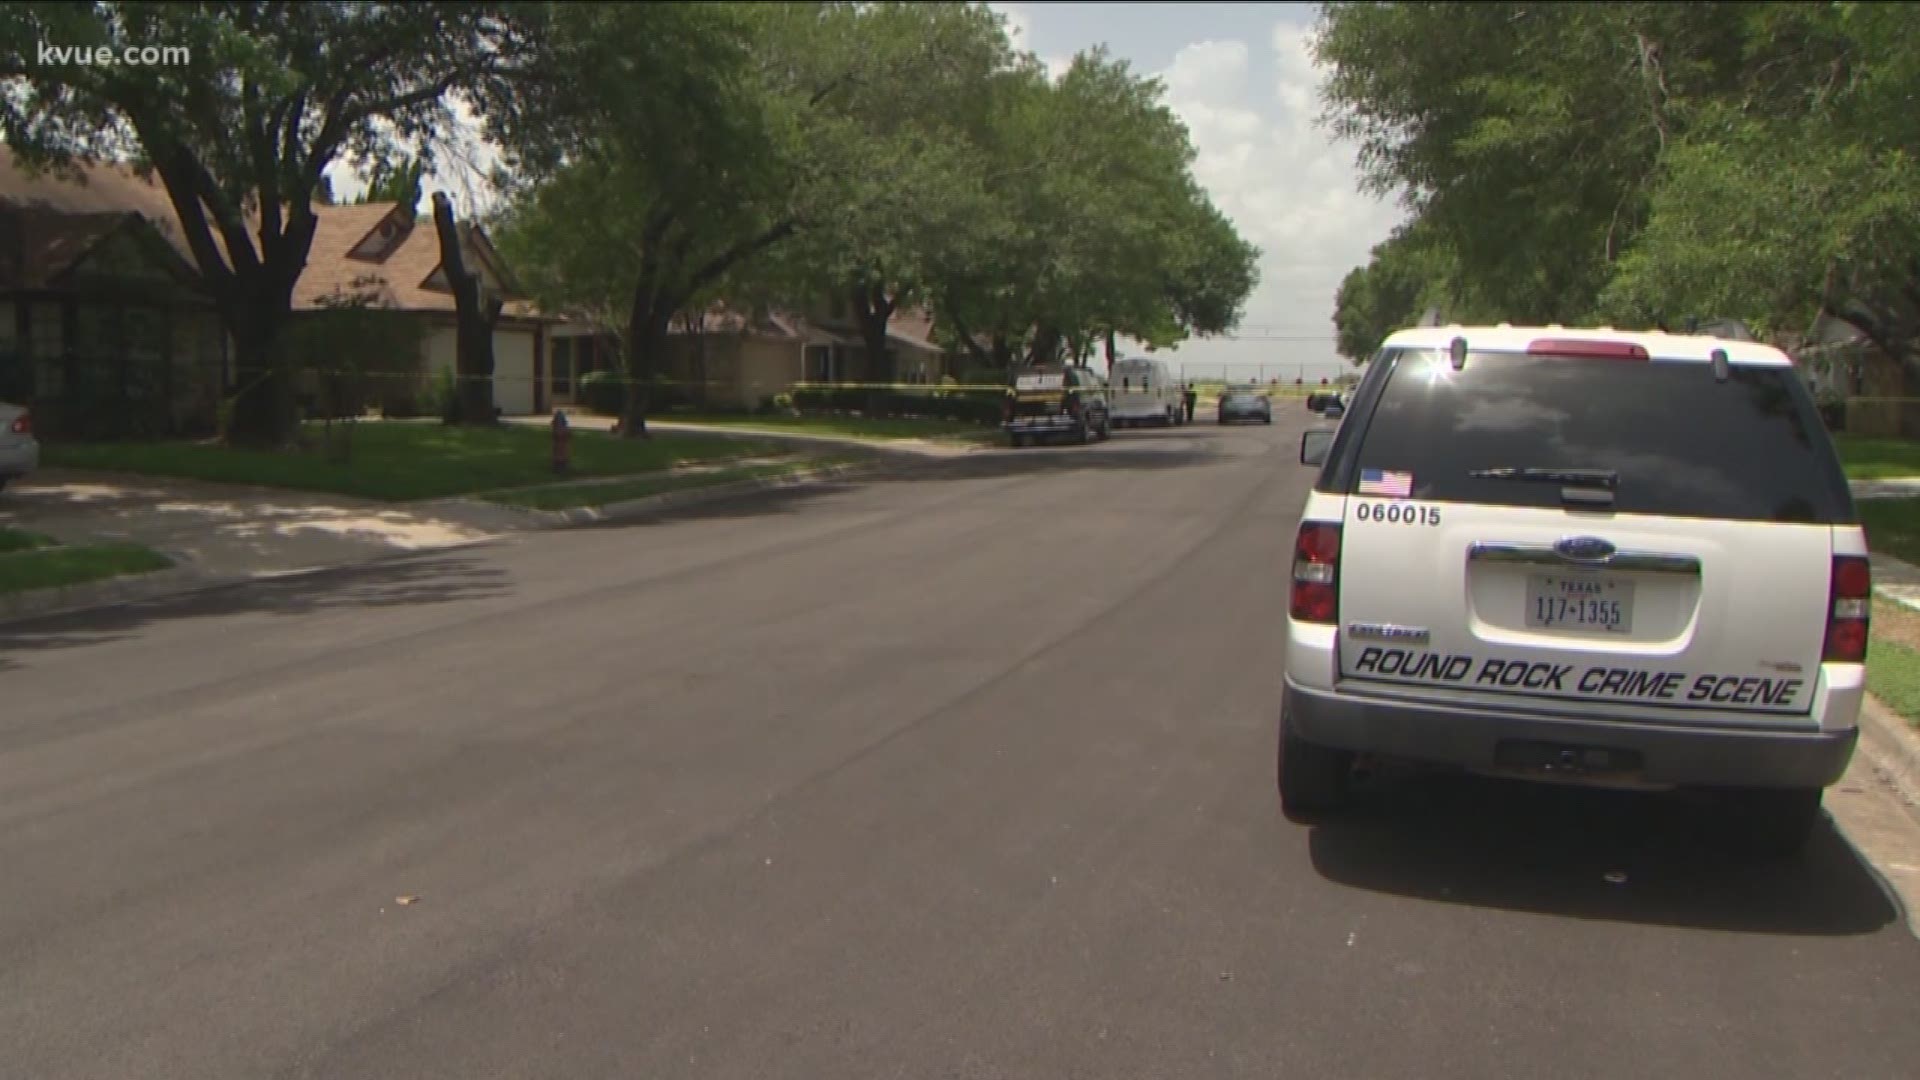 Police are describing a shooting death in Round Rock as a domestic situation.